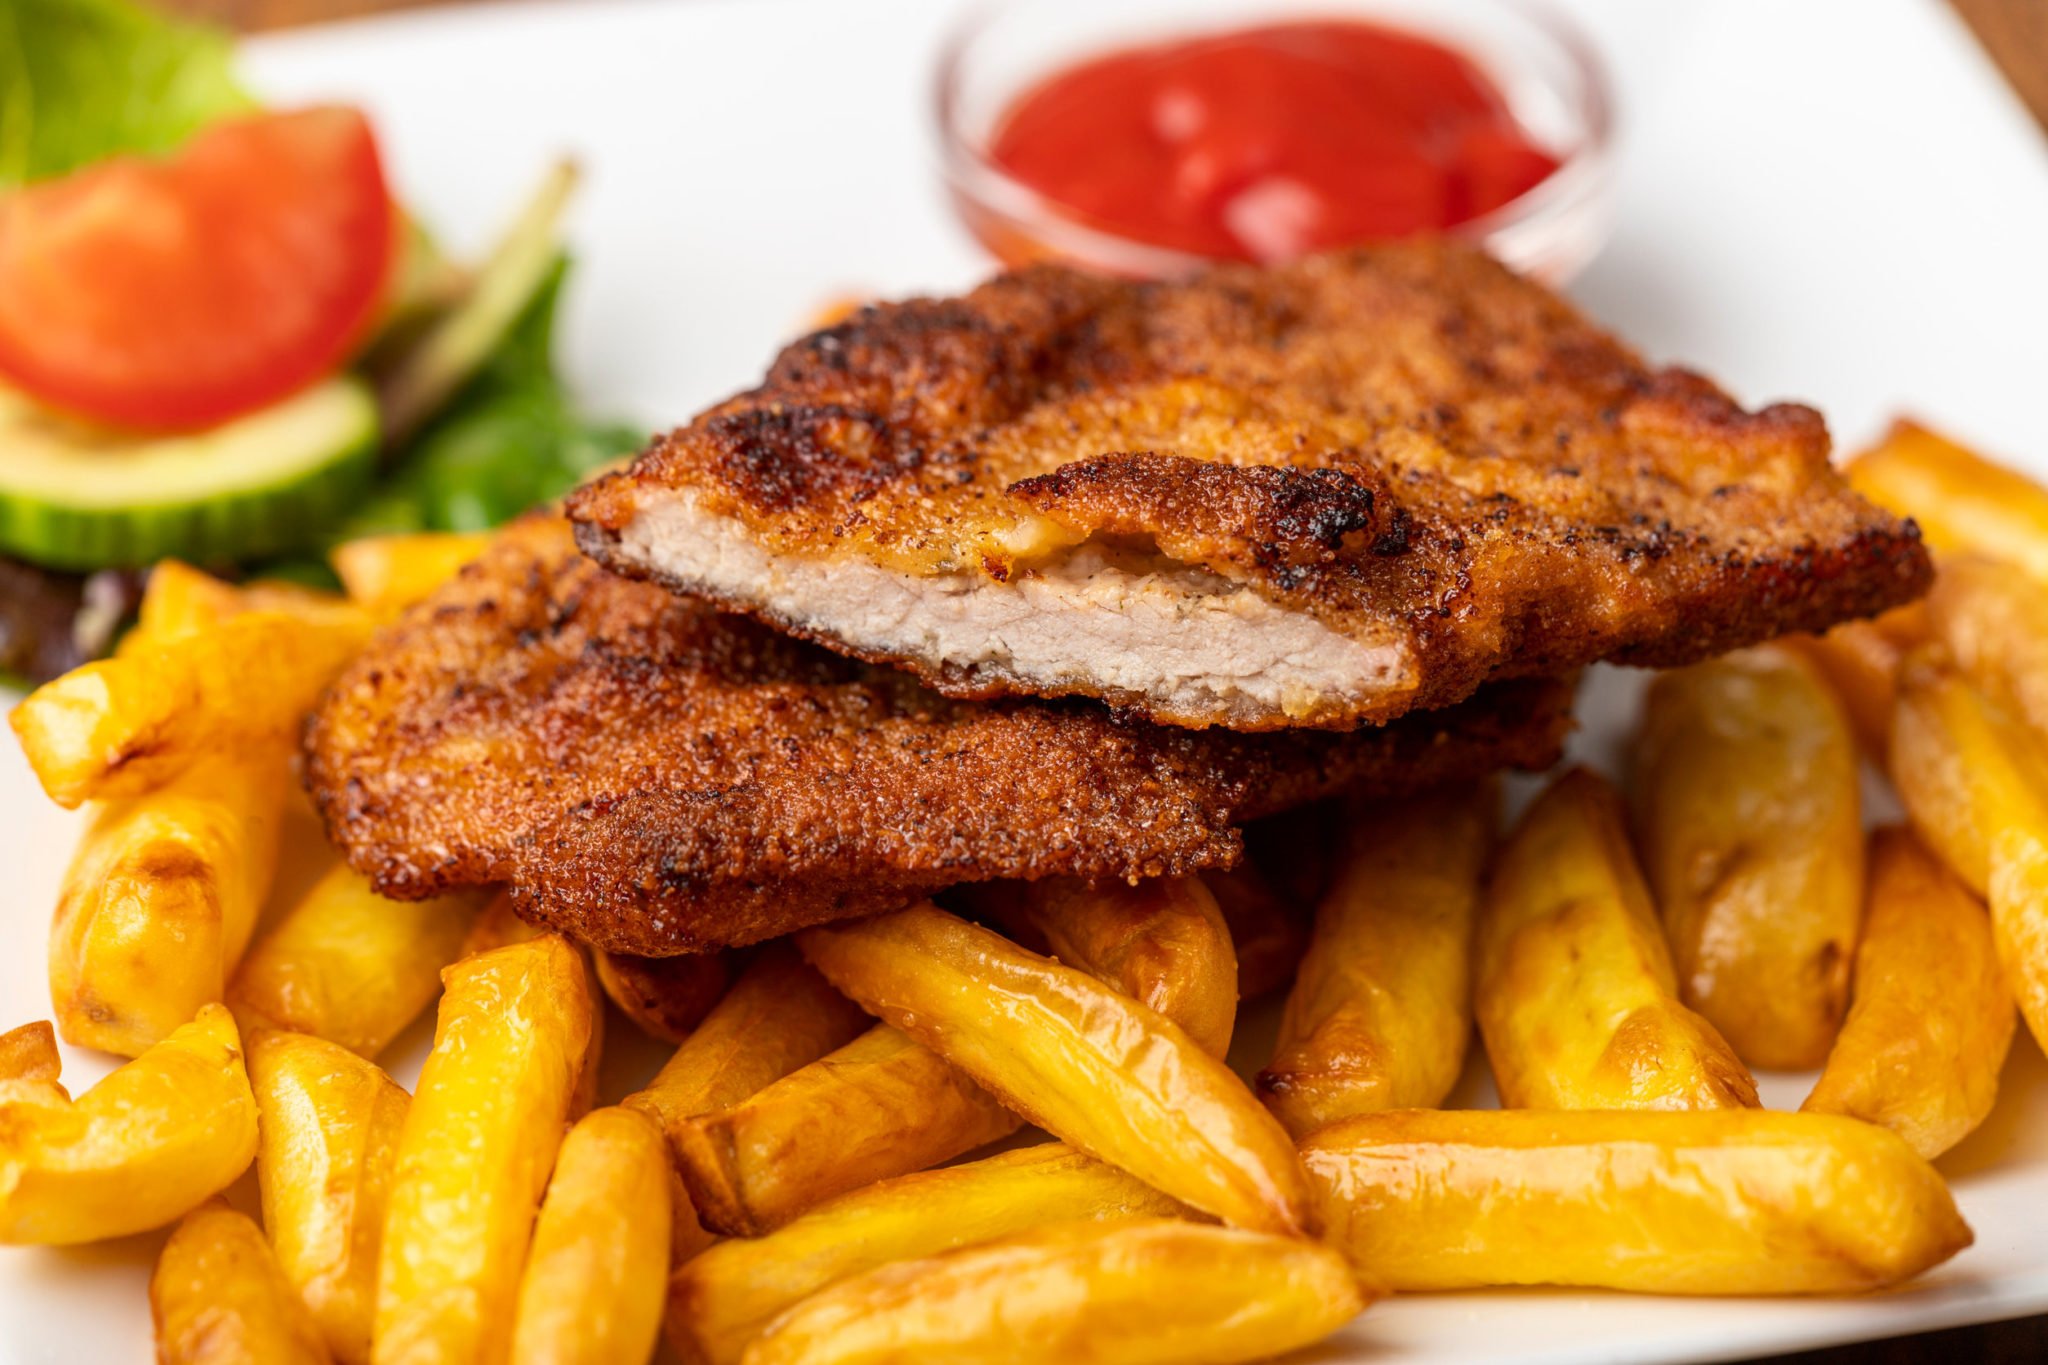 wiener schnitzel with french fries on a plate